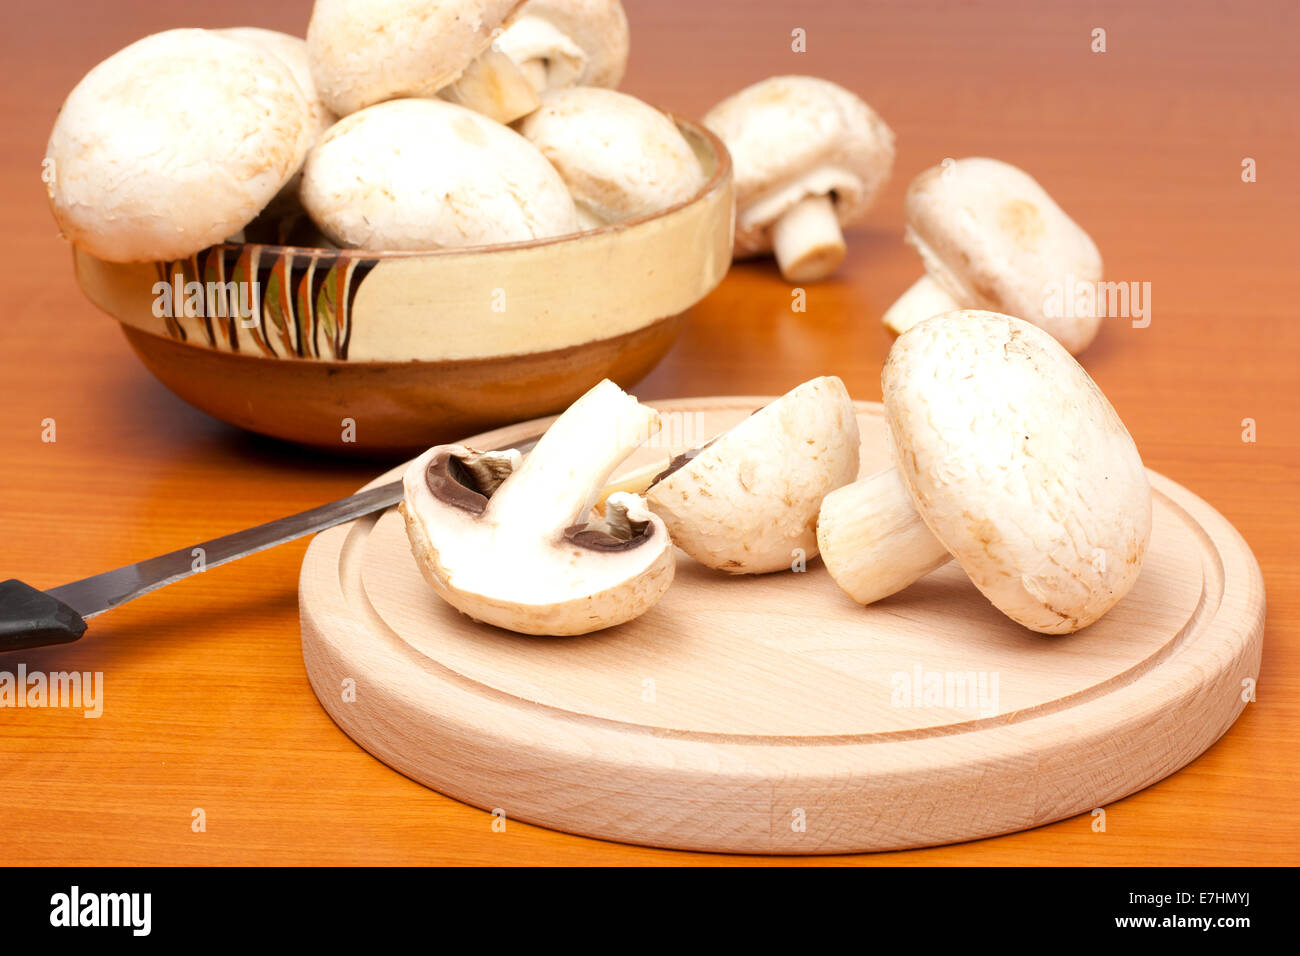 Mushrooms on a cutting board with a knife on wood background Stock Photo